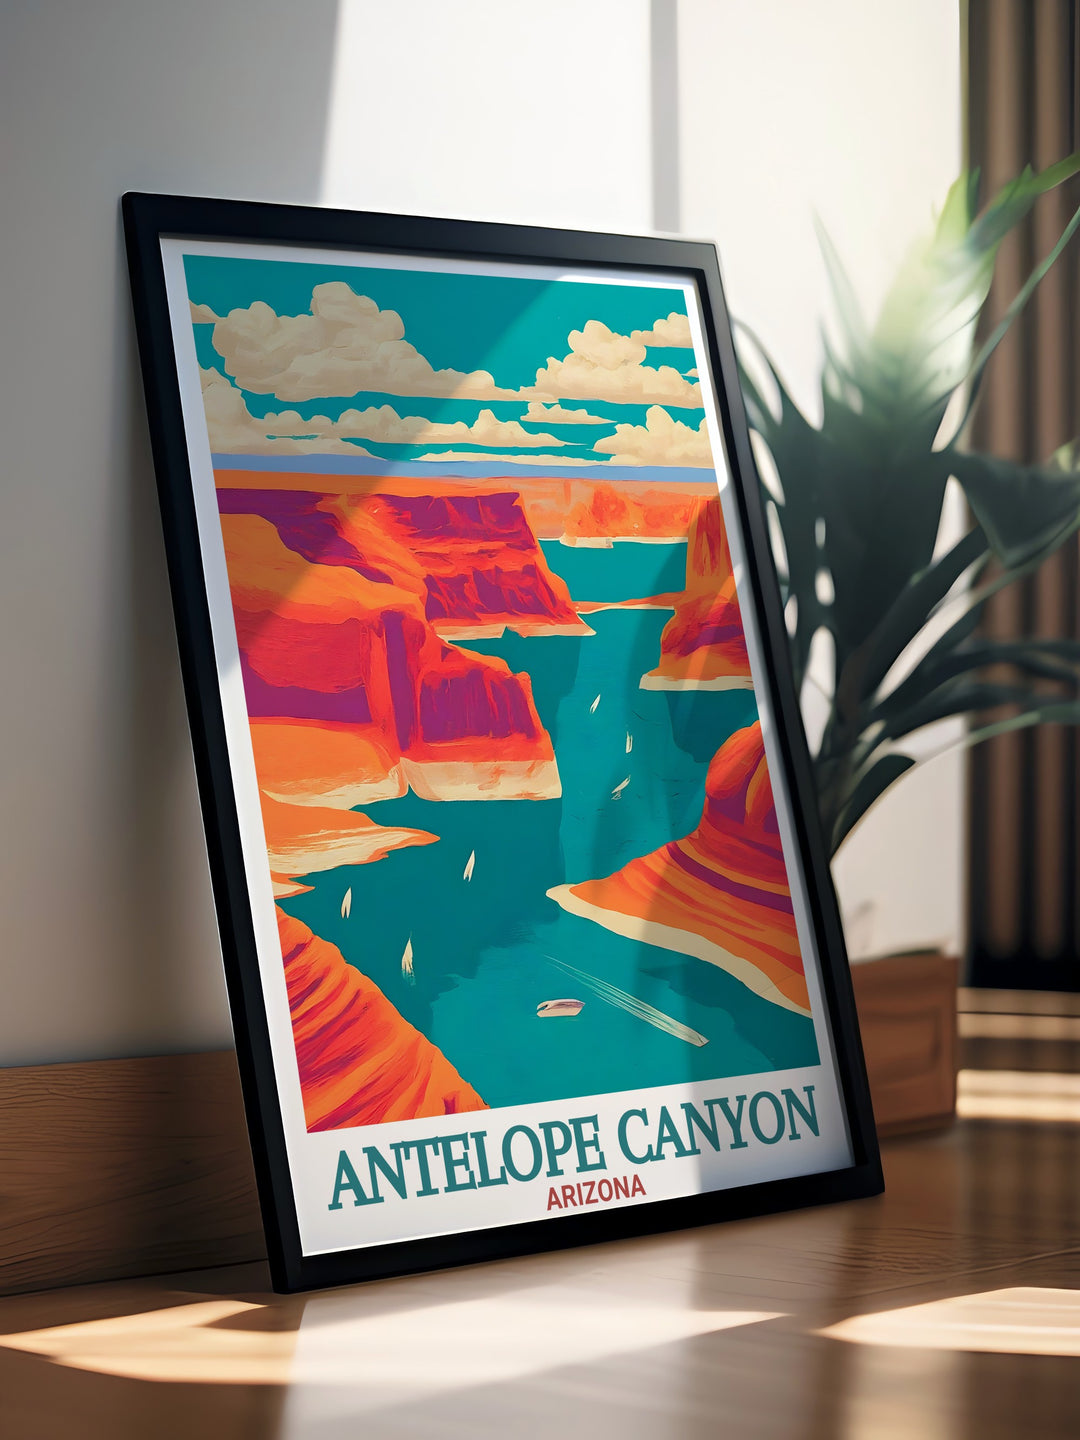 Lake Powell modern art print that brings the majestic beauty of this Arizona landmark into your home a stunning piece for those who love landscape art and wish to showcase the wonders of nature.